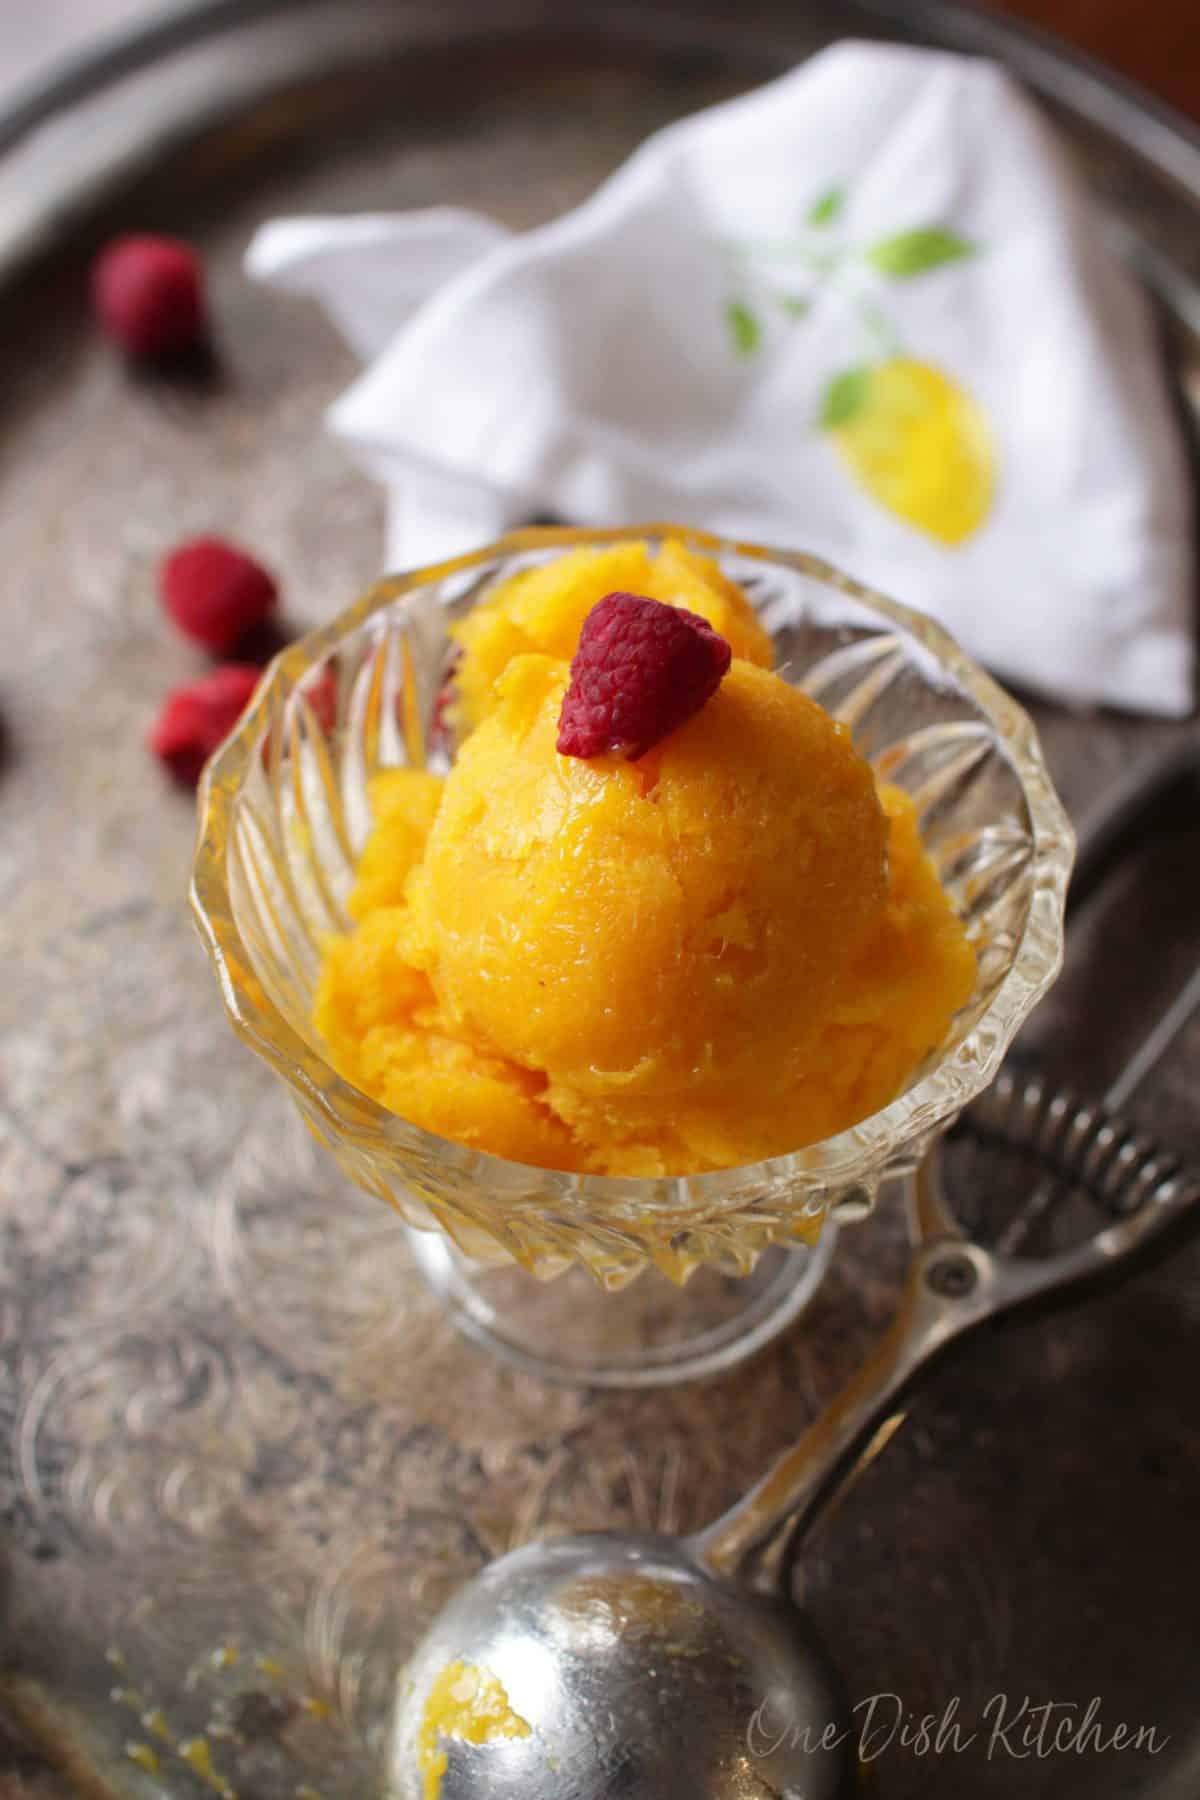 Mango sorbet topped with a raspberry in a dessert glass next to an ice cream scoop on a metal tray with scattered raspberries.